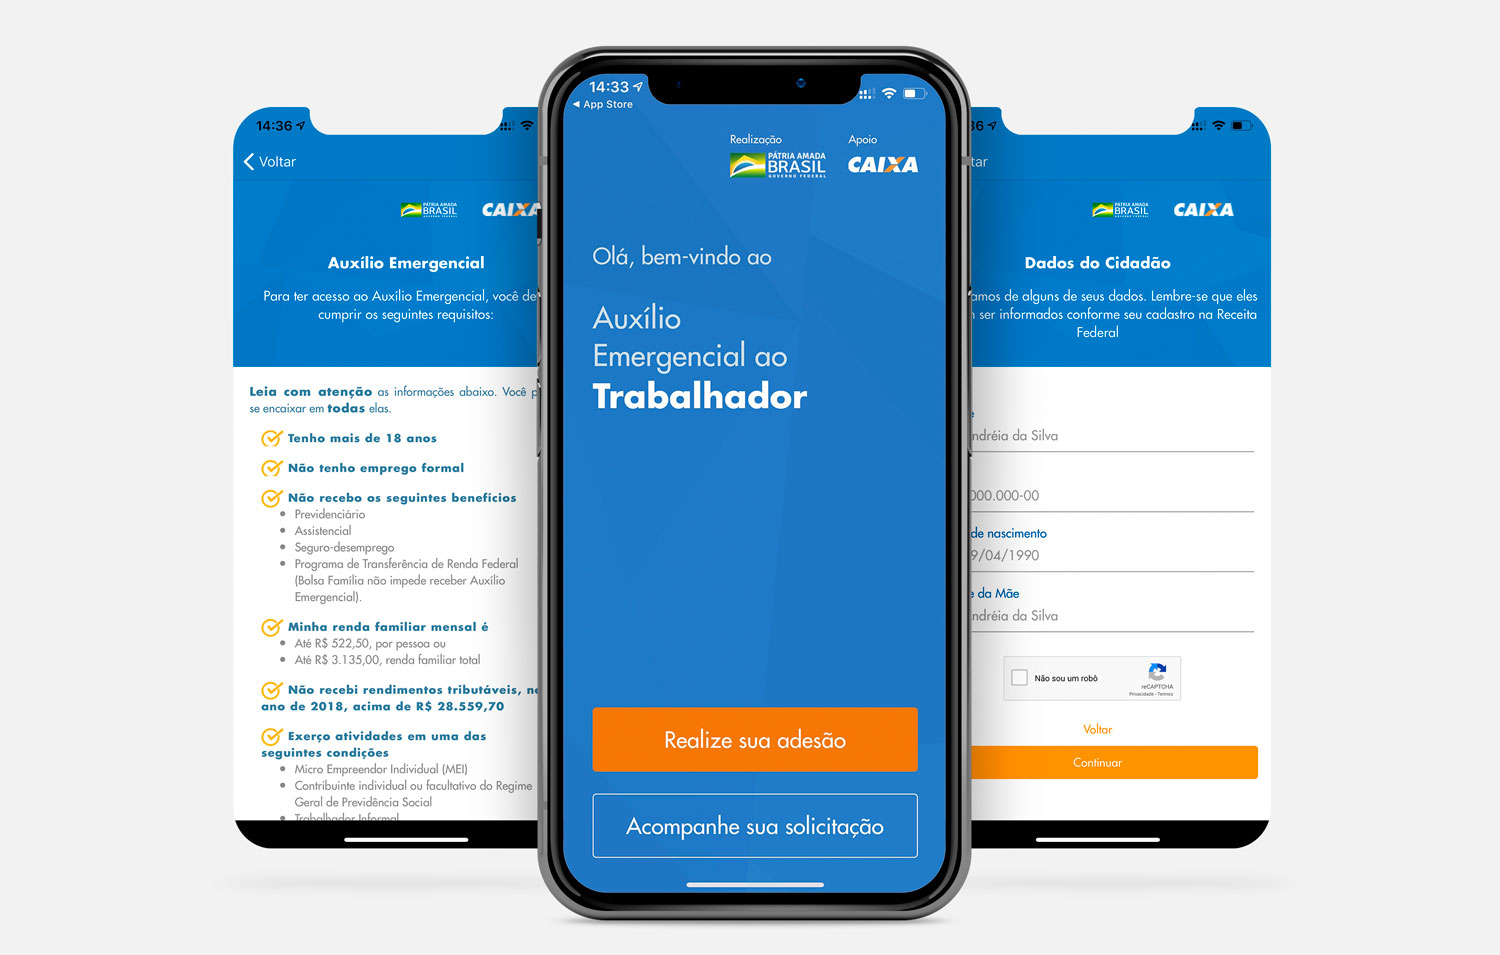 See how to download the official Caixa application for emergency financial assistance on your iPhone